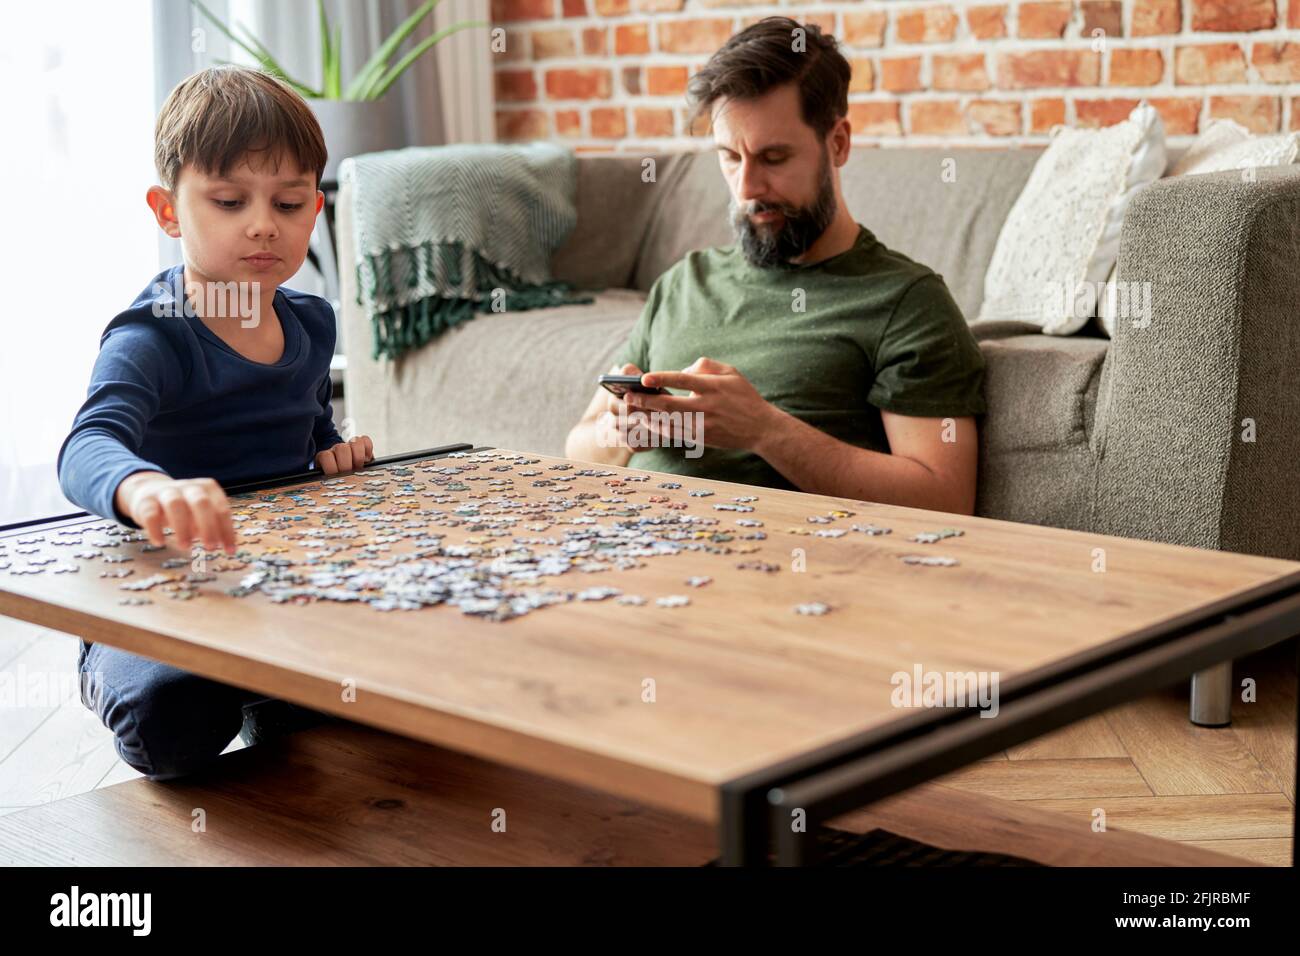 Boy solving jigsaw puzzle during father using Stock Photo